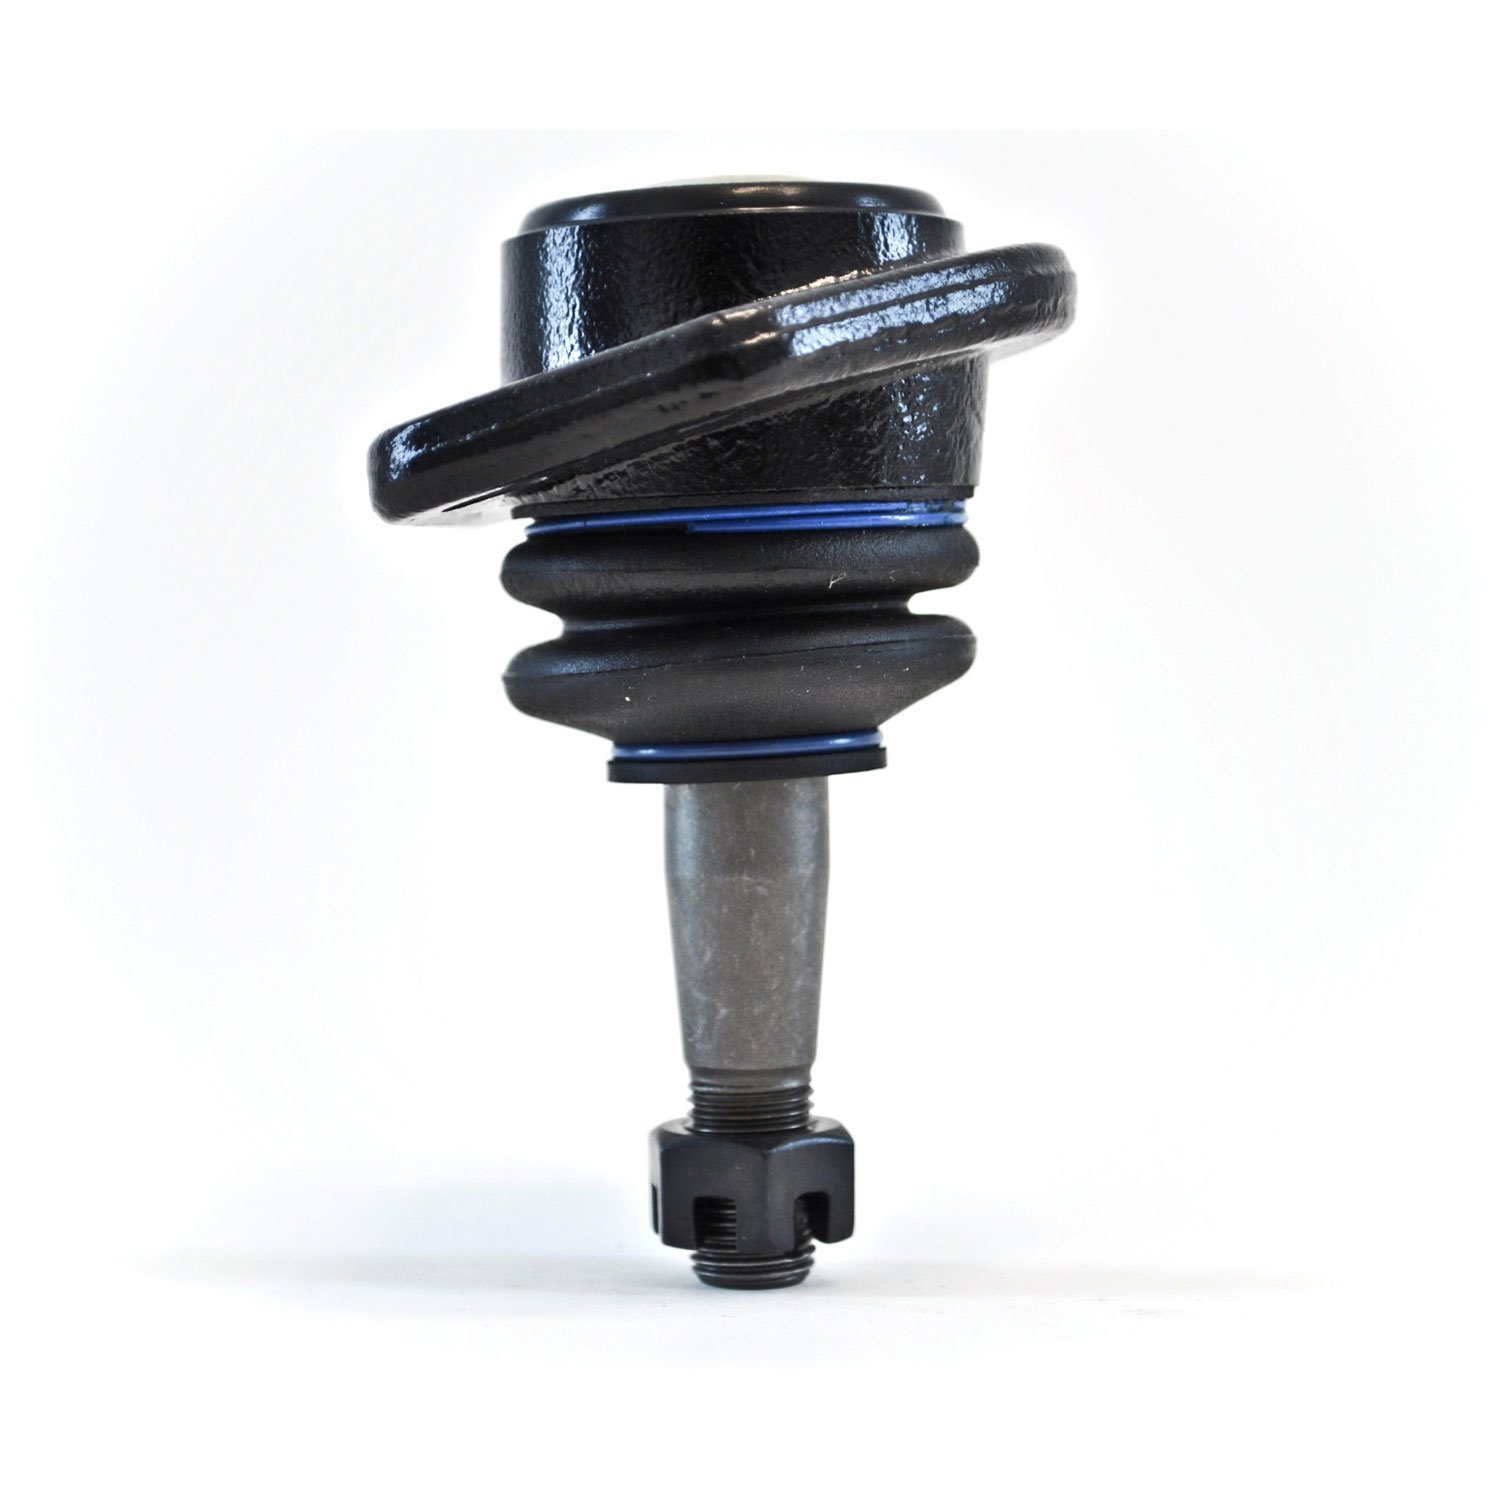 Extra travel for lowered trucks; Virtually rustproof black e-coated finish; Forged SAE4135 ball stud